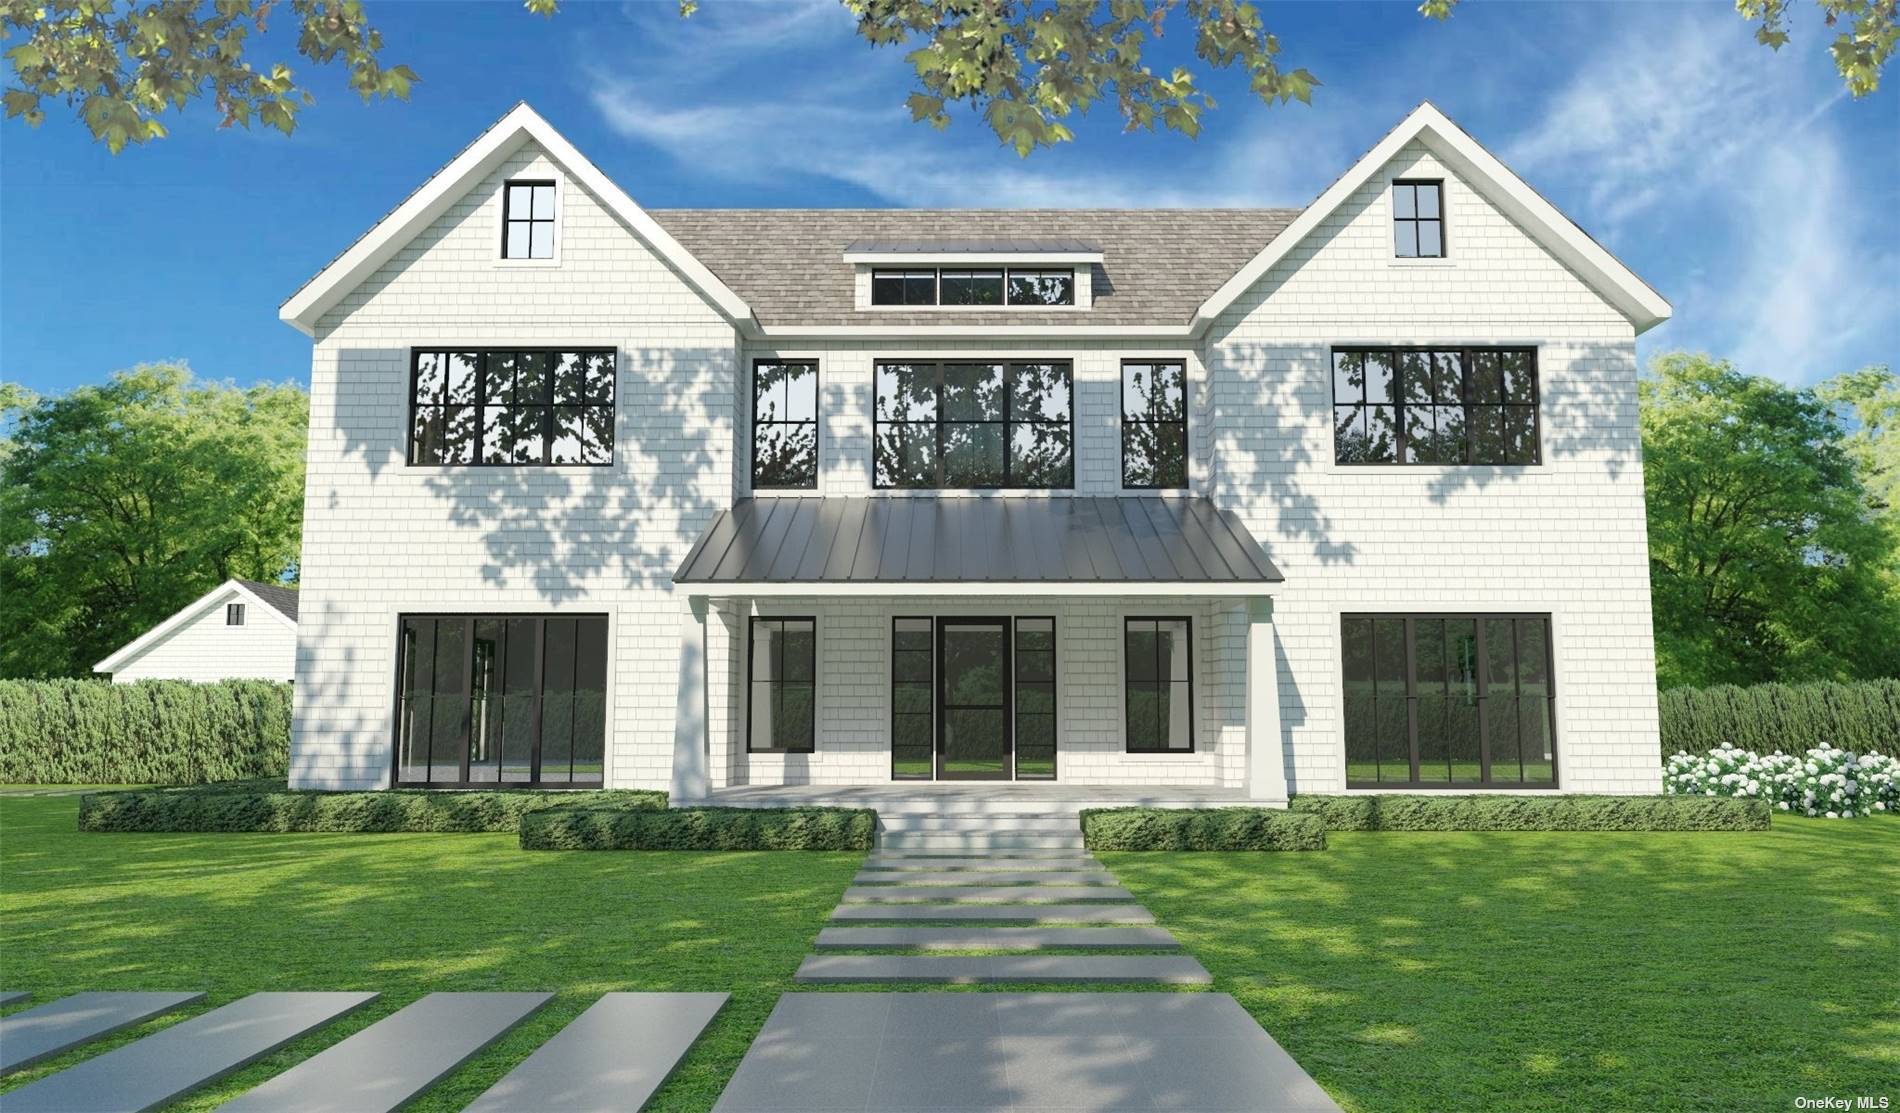 Proposed new construction located in the heart of Southampton Village, all plans and approvals in place.